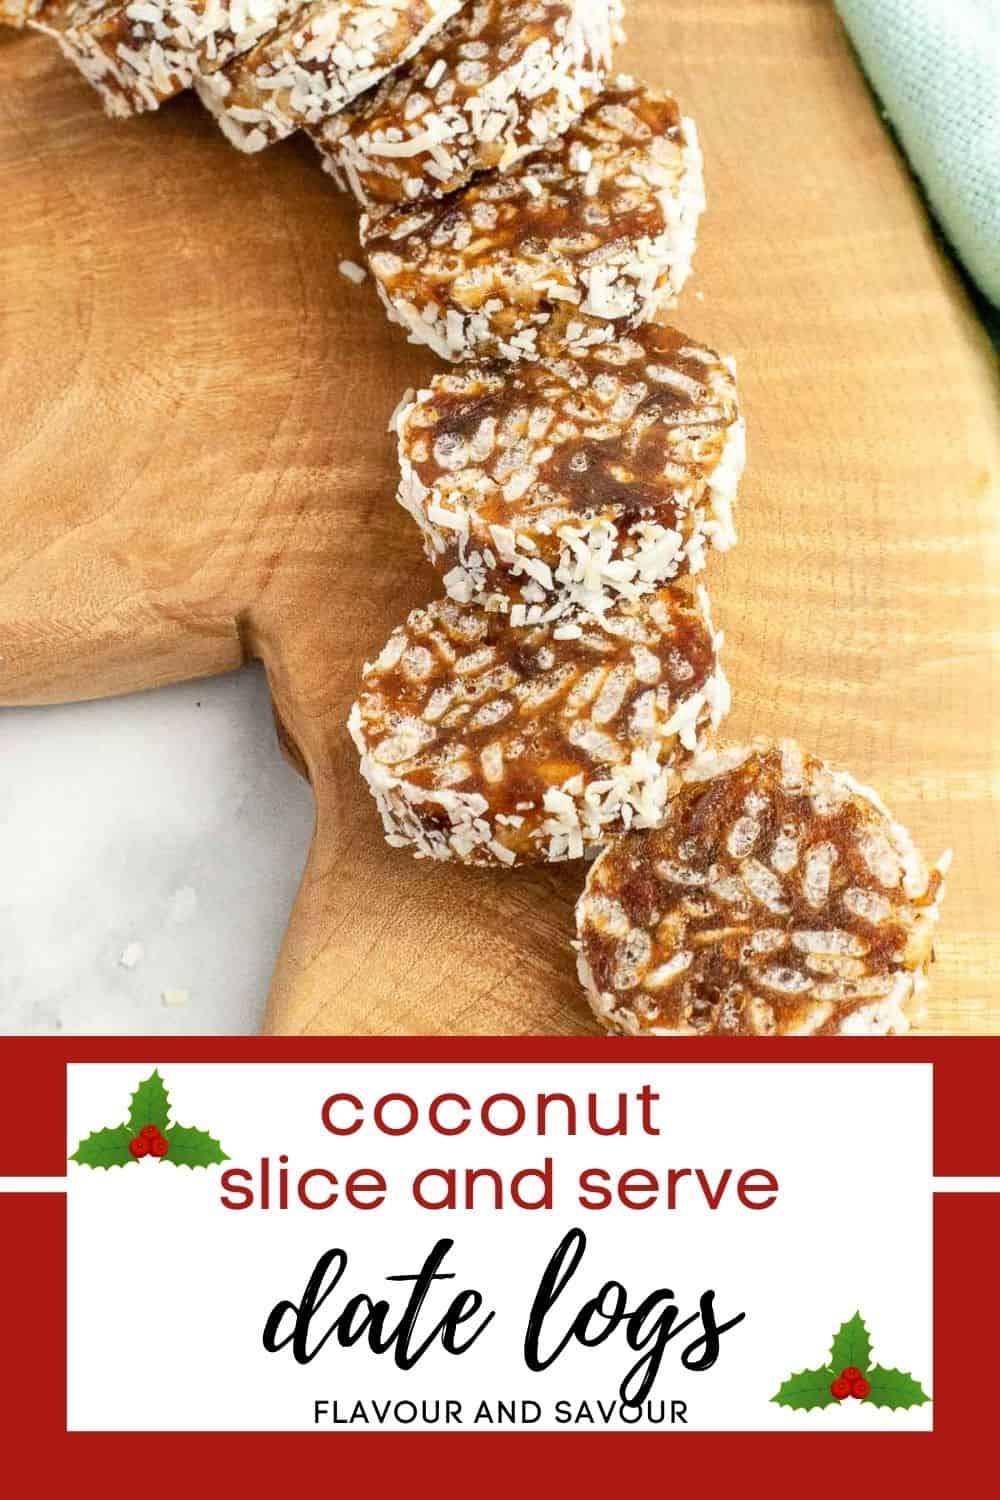 image with text for coconut slice and serve date logs